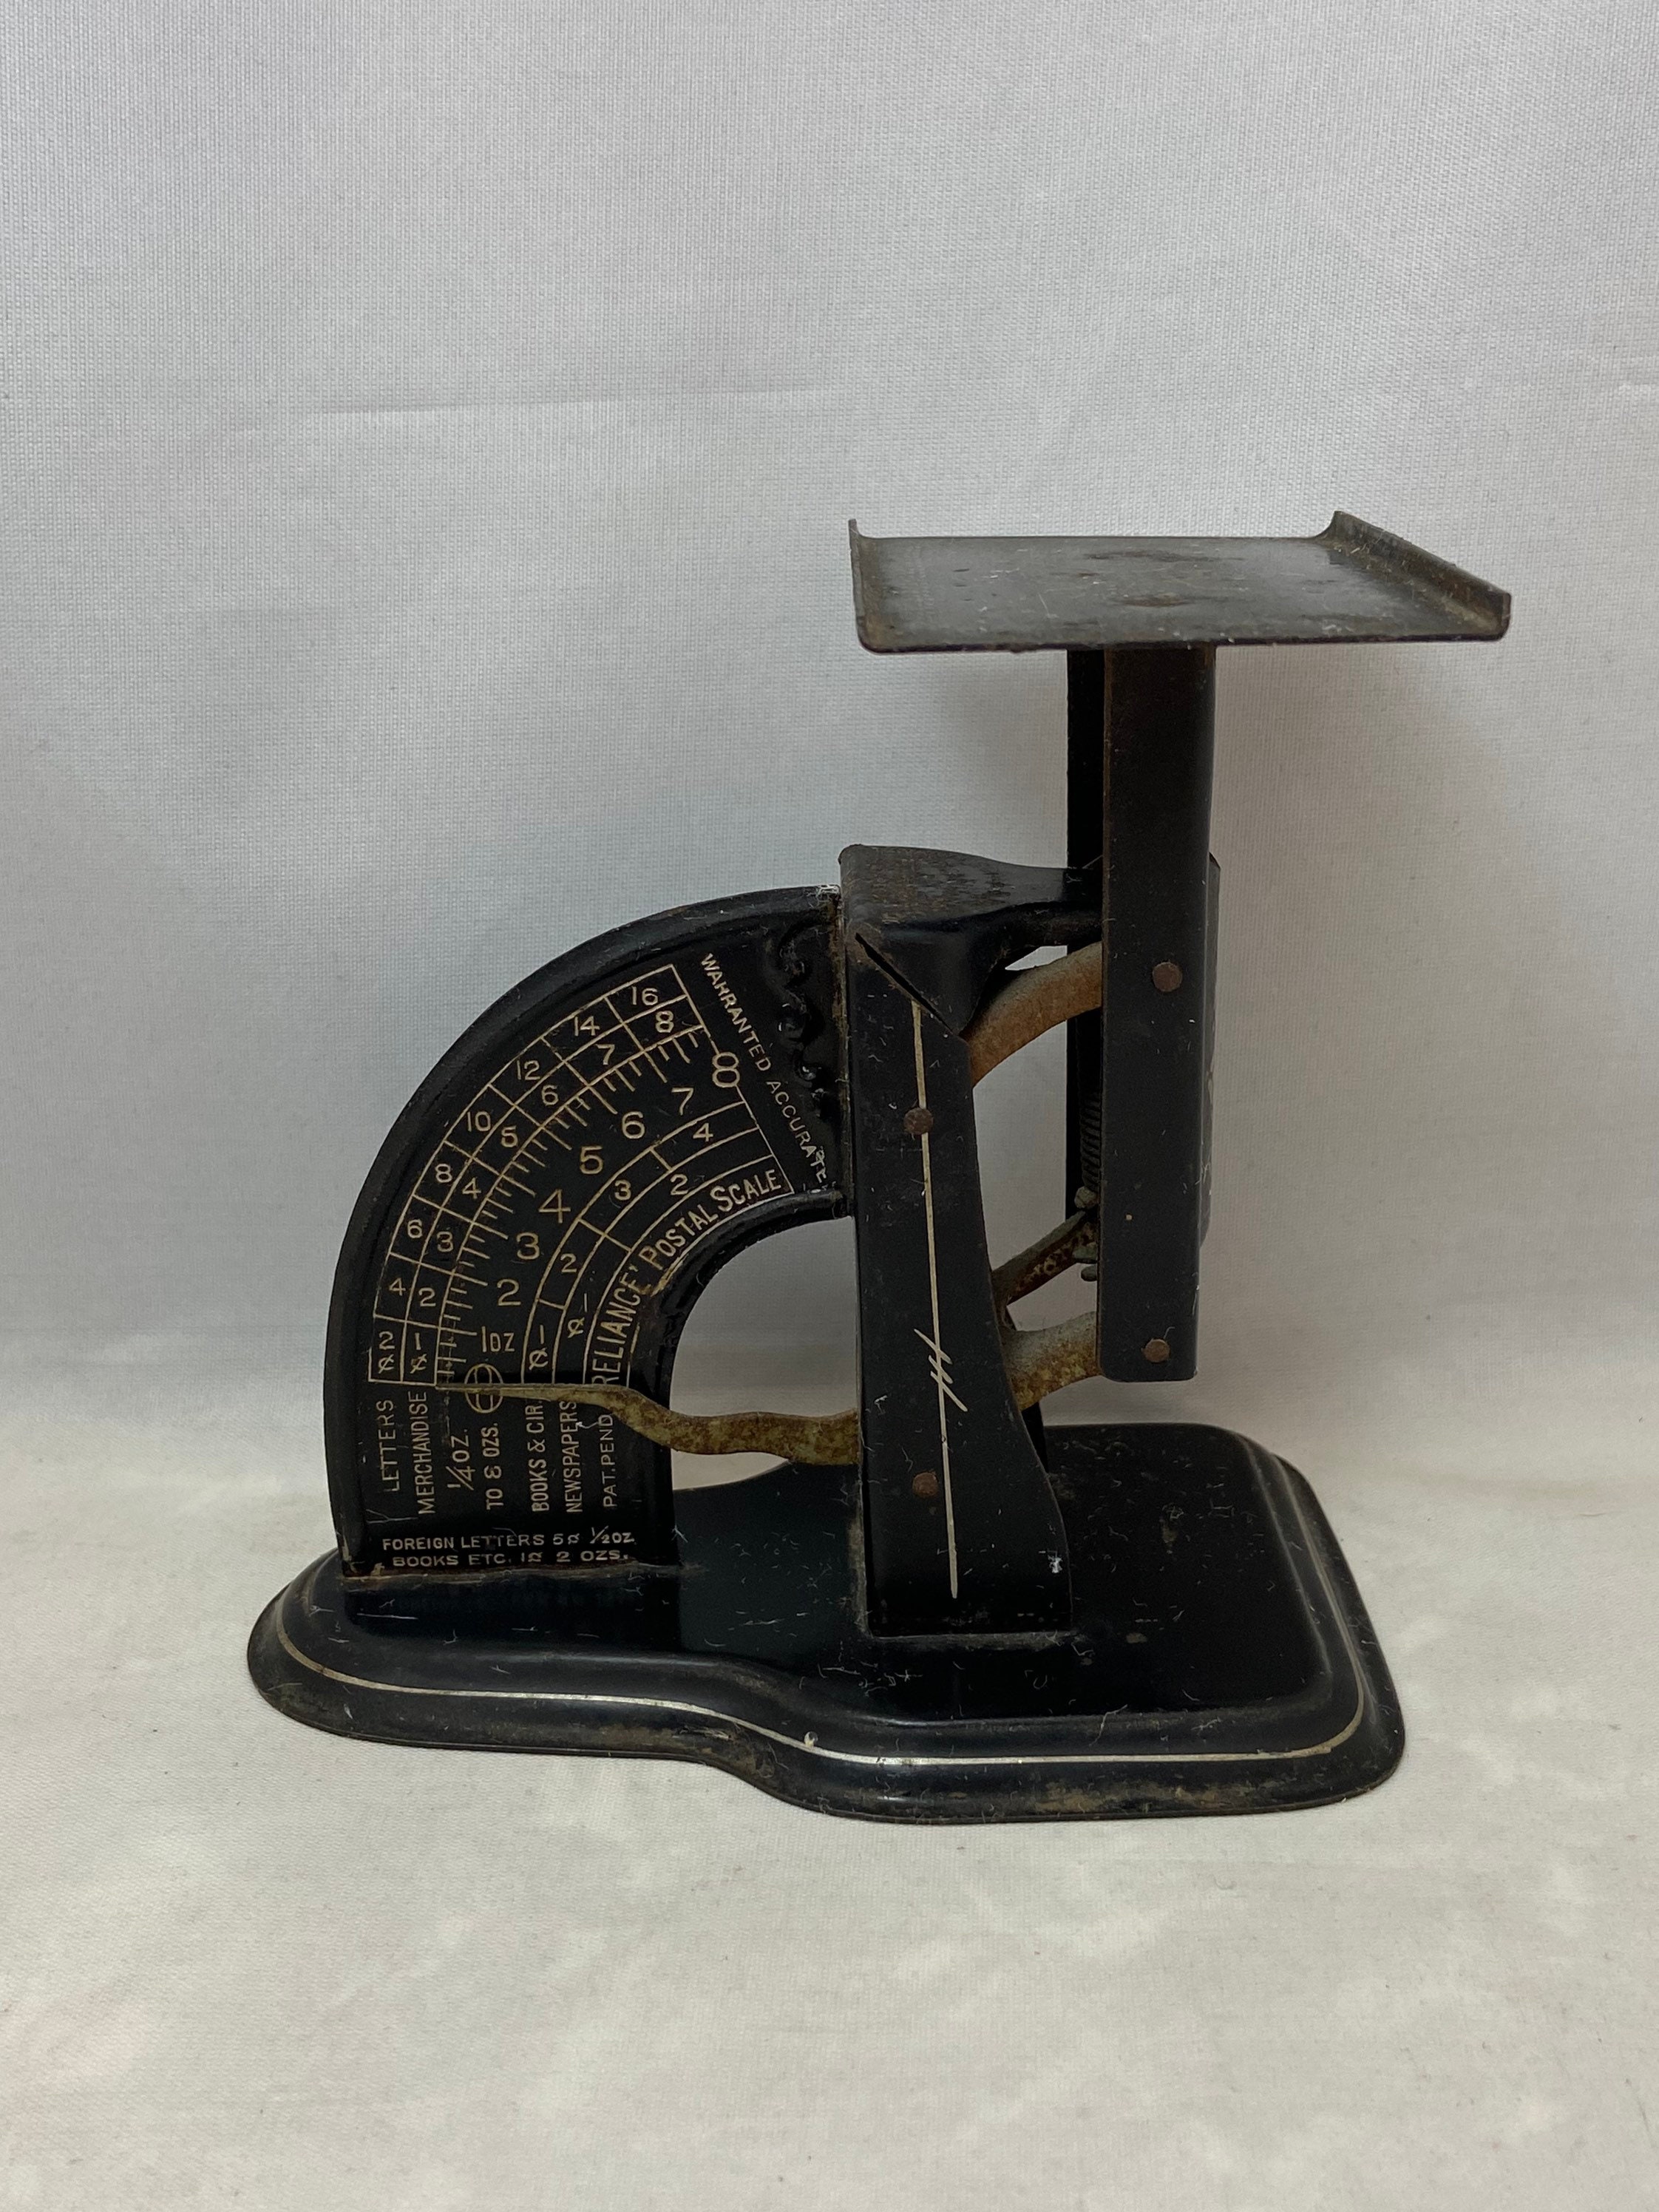 Vintage post office / postal scales - price guide and values